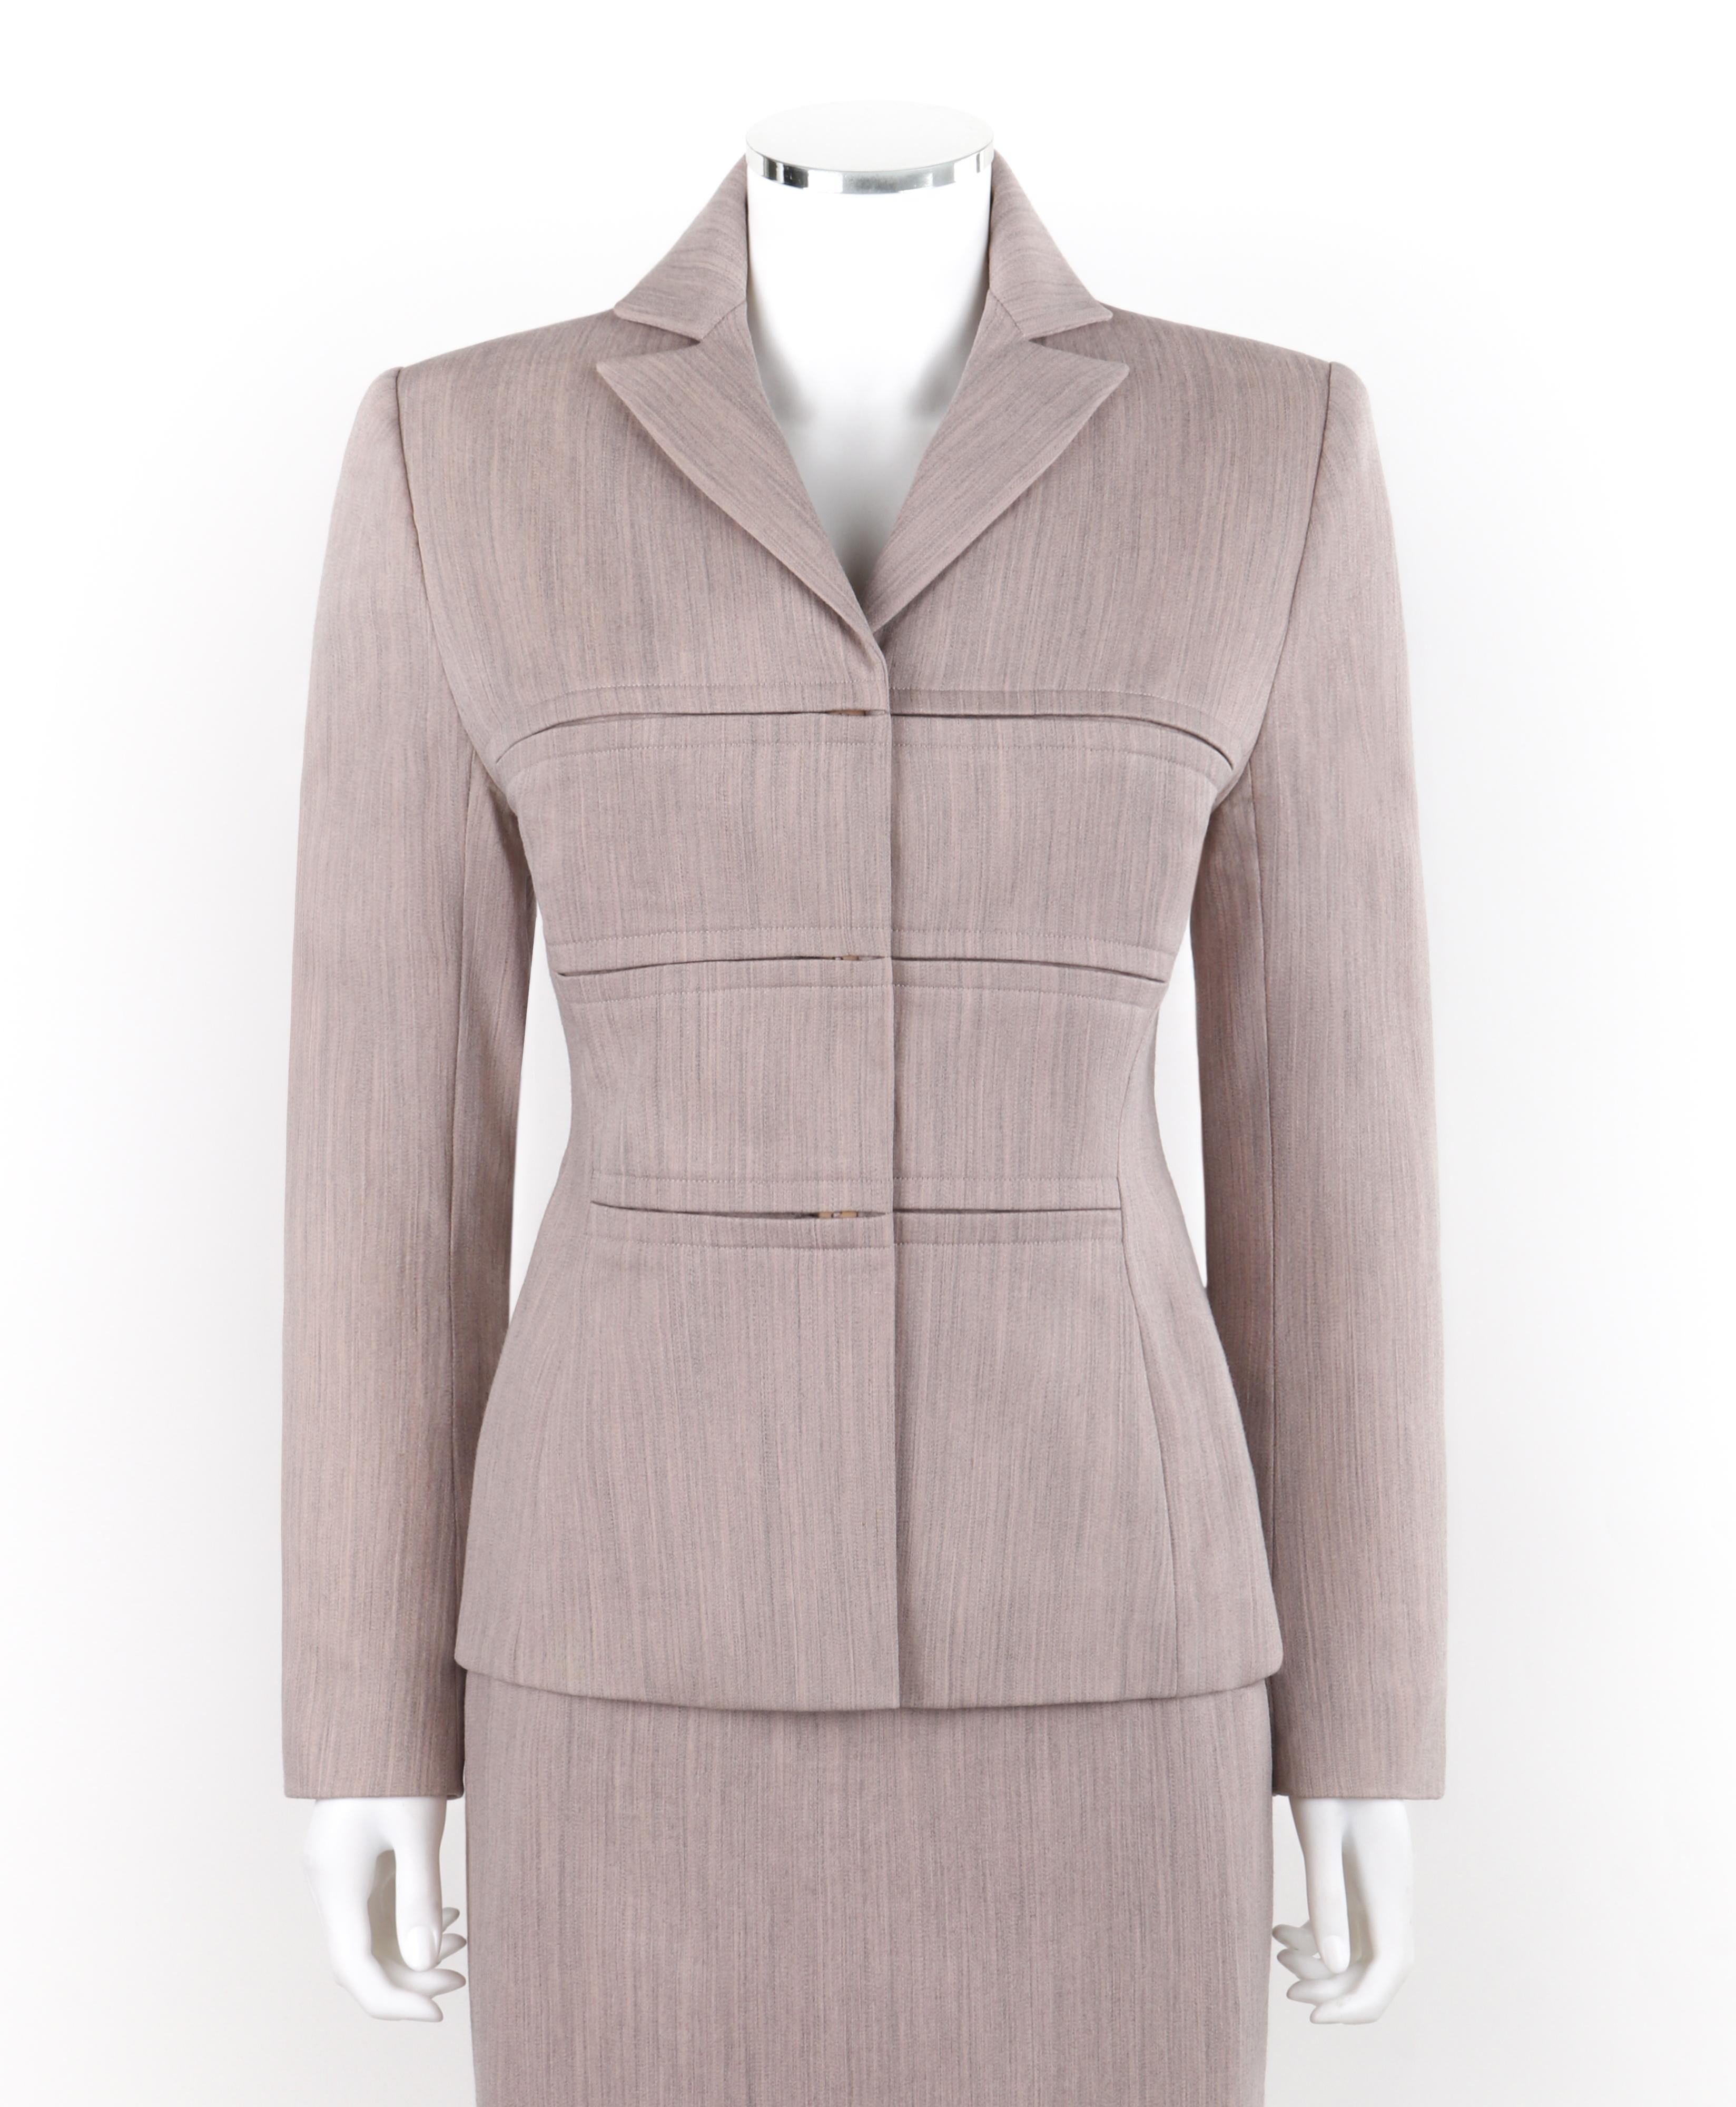 Brand / Manufacturer: Givenchy 
Collection: A/W 1998
Designer: Alexander McQueen
Style: Skirt Suit Set
Color(s): Shades of gray, pink
Lined: Yes
Marked Fabric Content: 